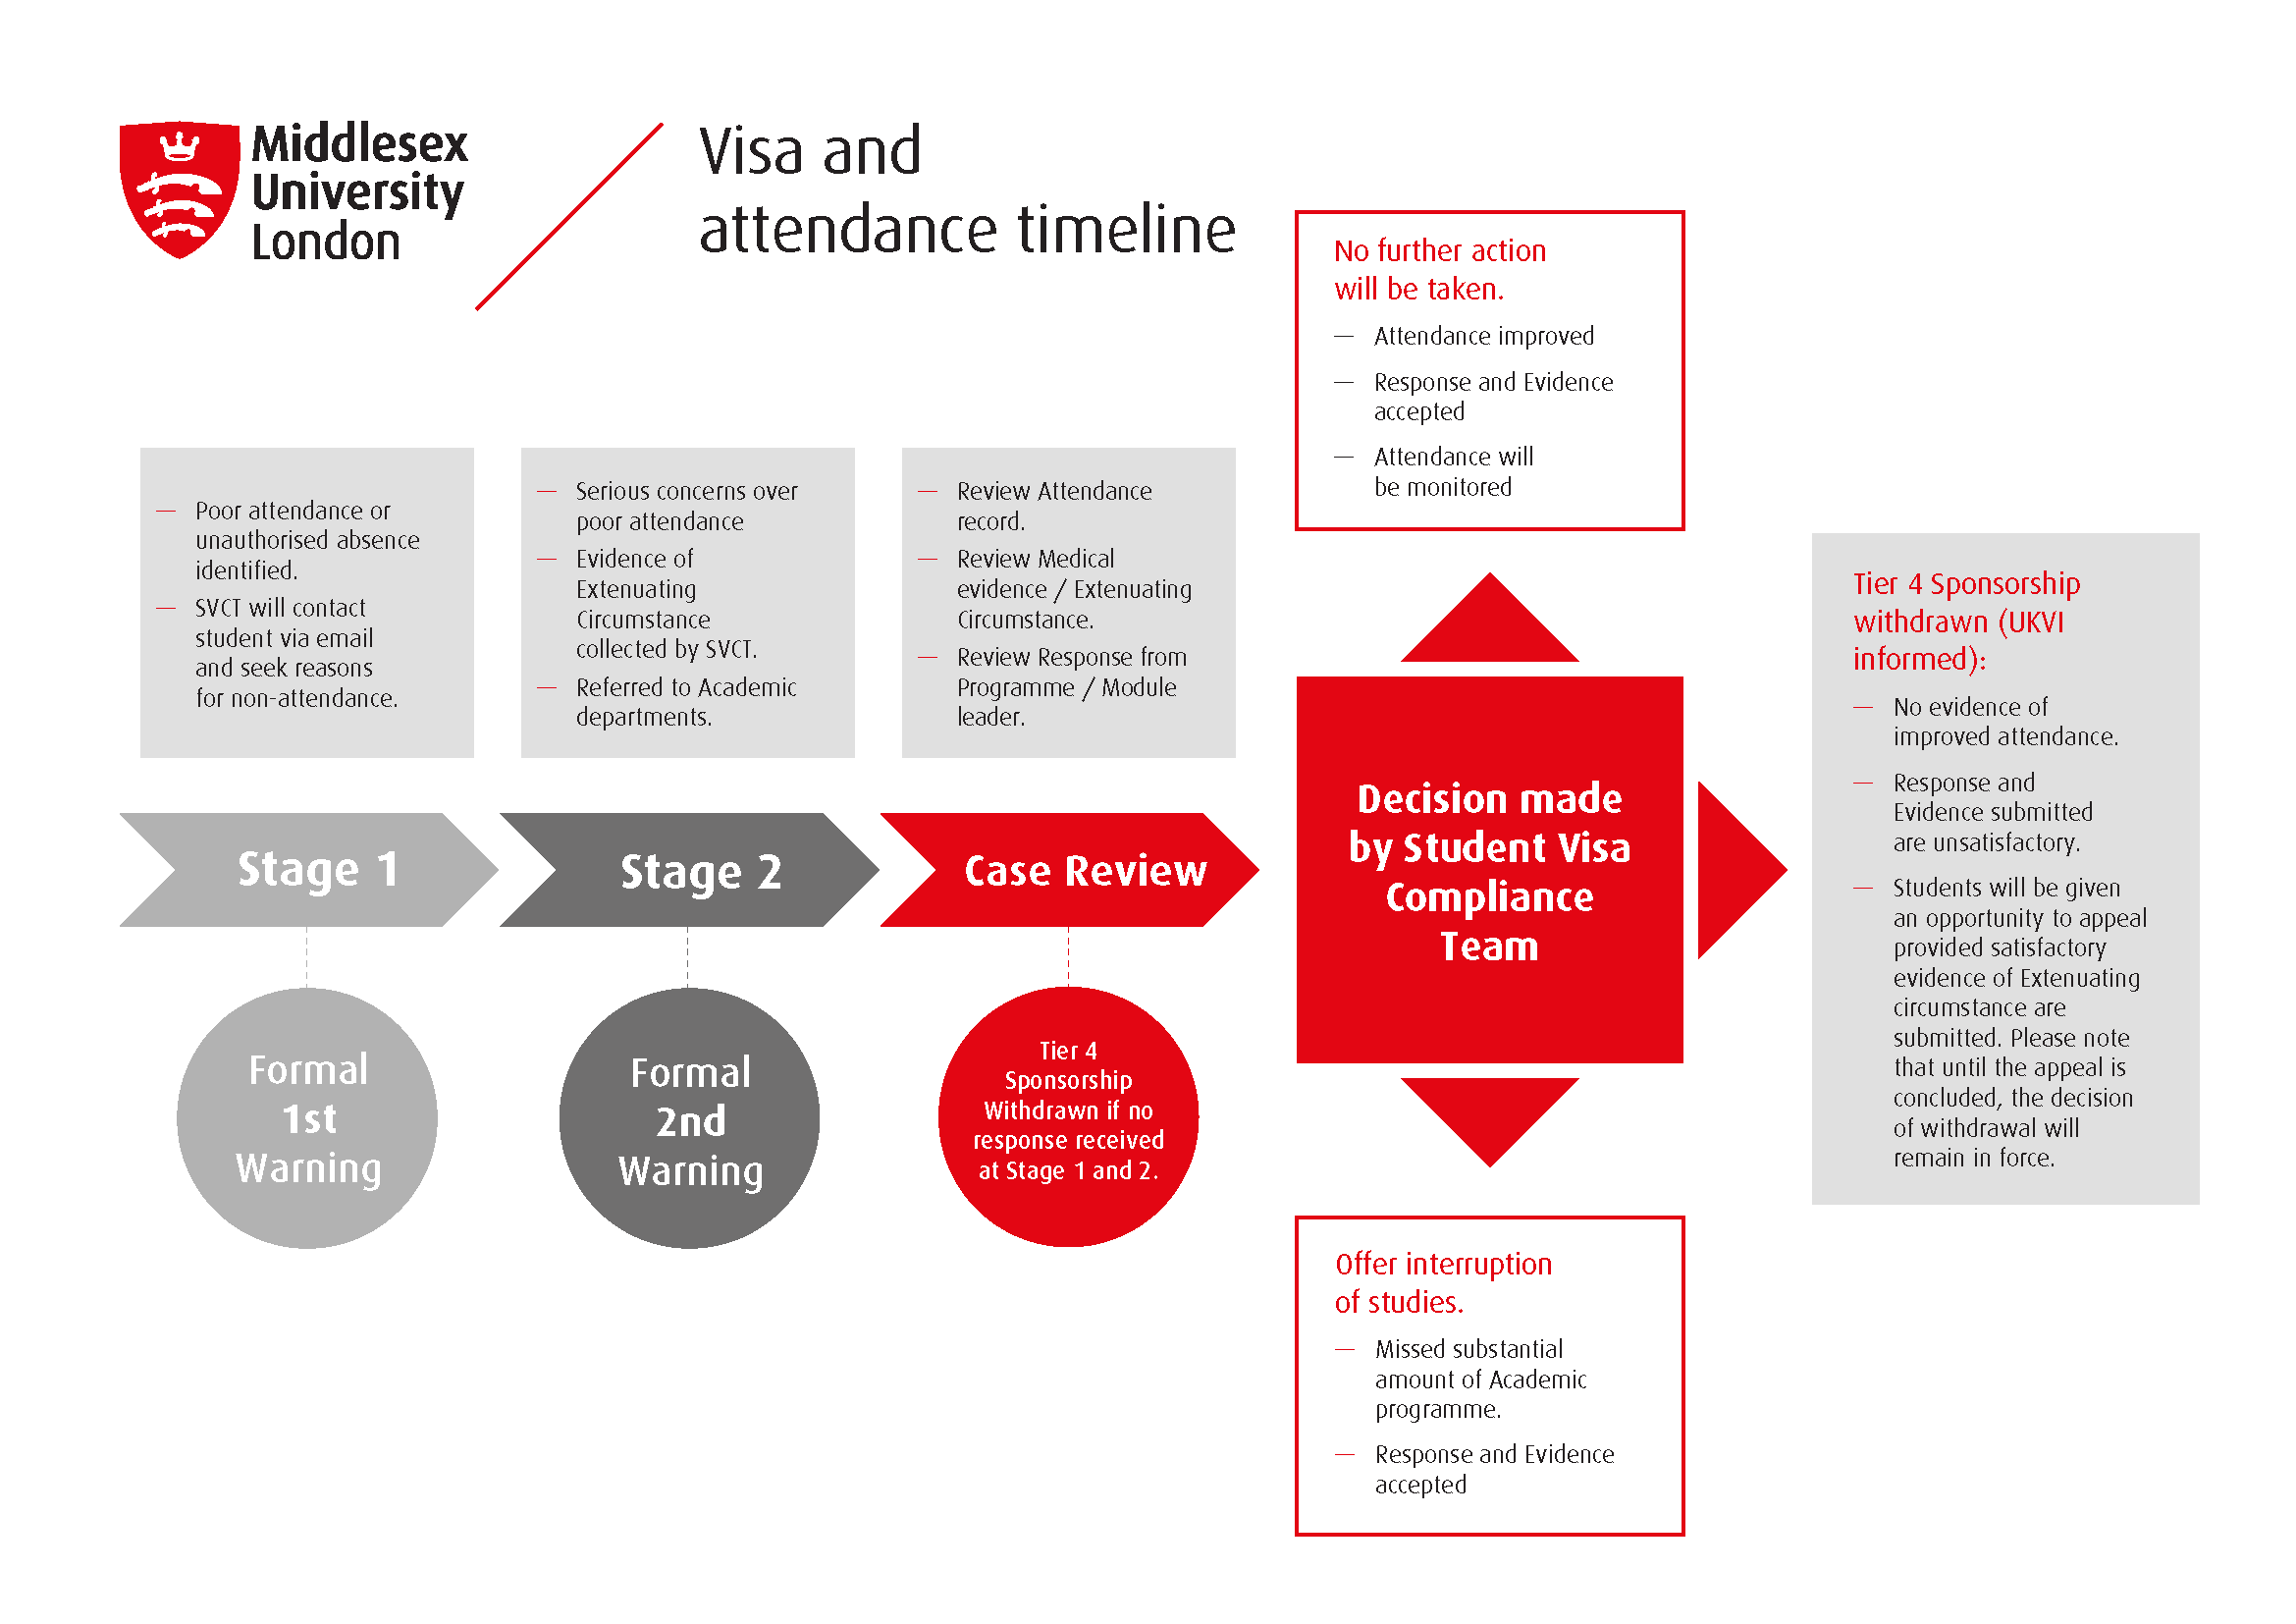 A visual representation of the visa and attendance timeline. This information is written out in the table beneath this infographic